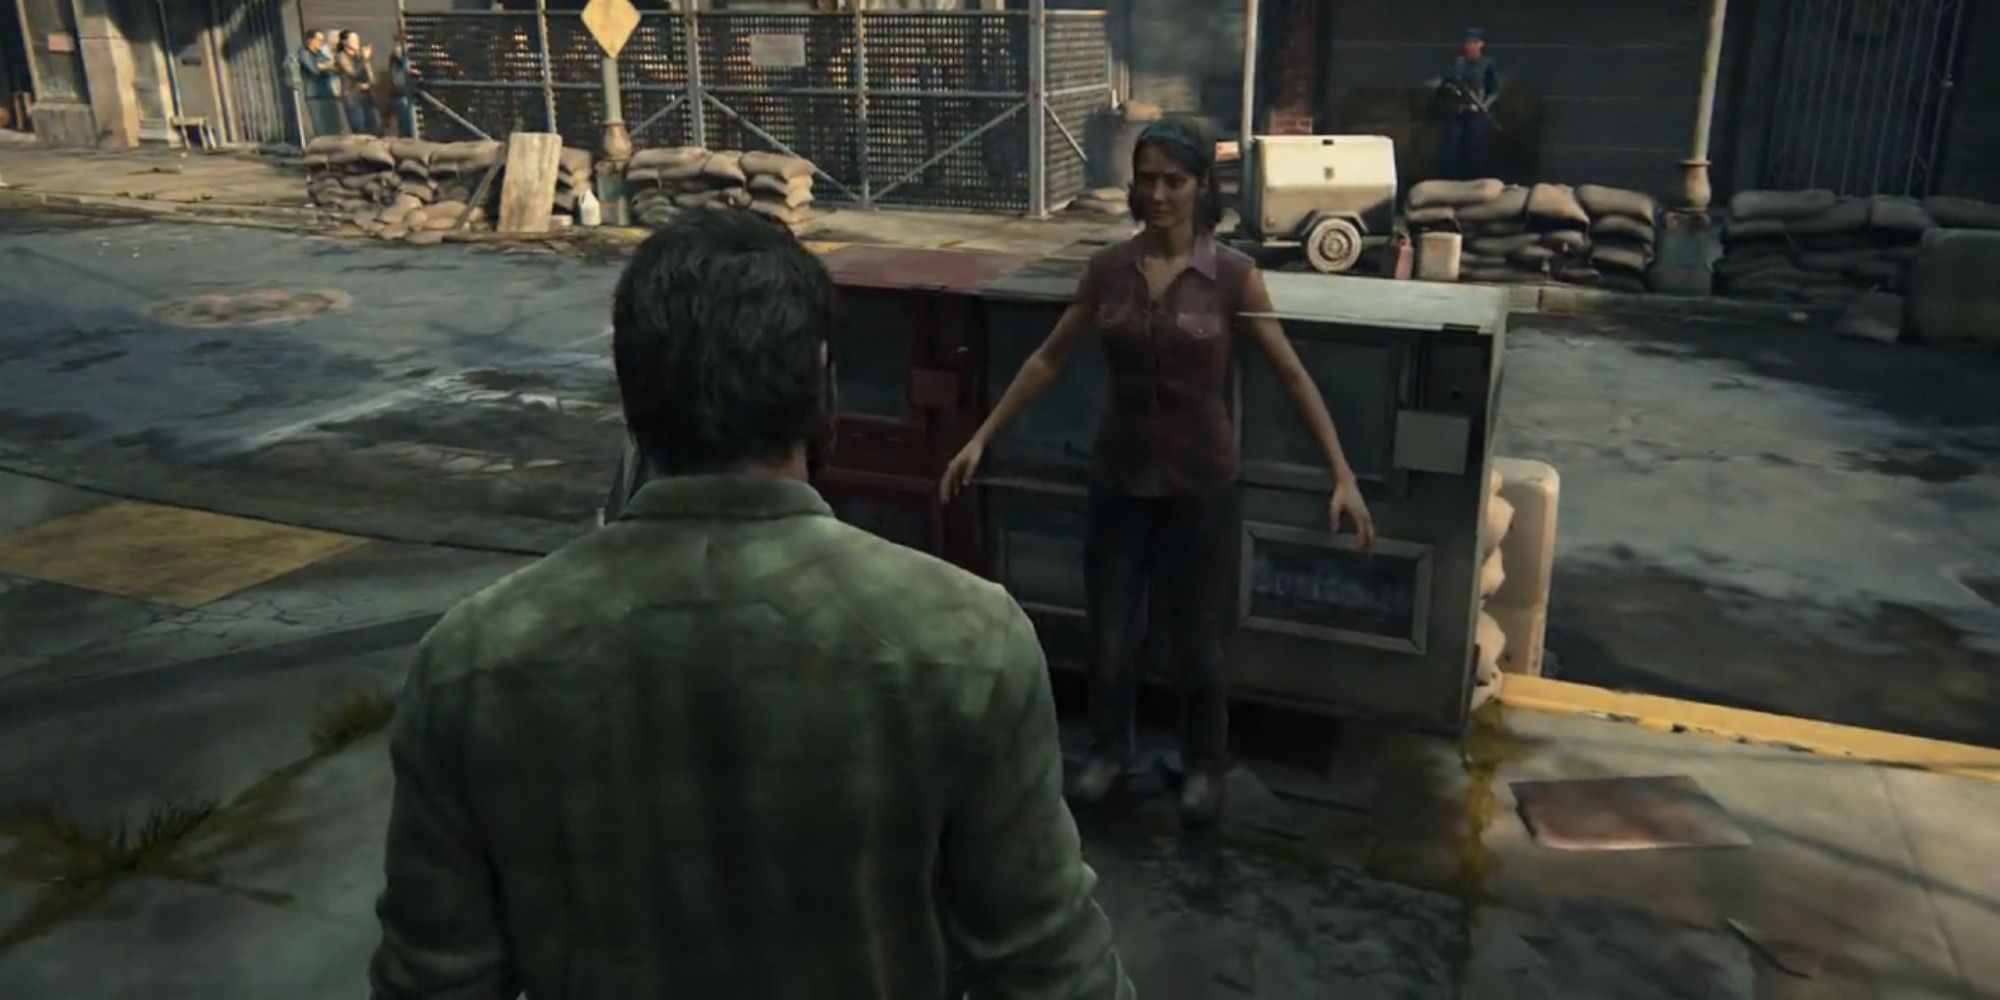 The Last Of Us PC Port Has Us In Tears Over Its Glitches